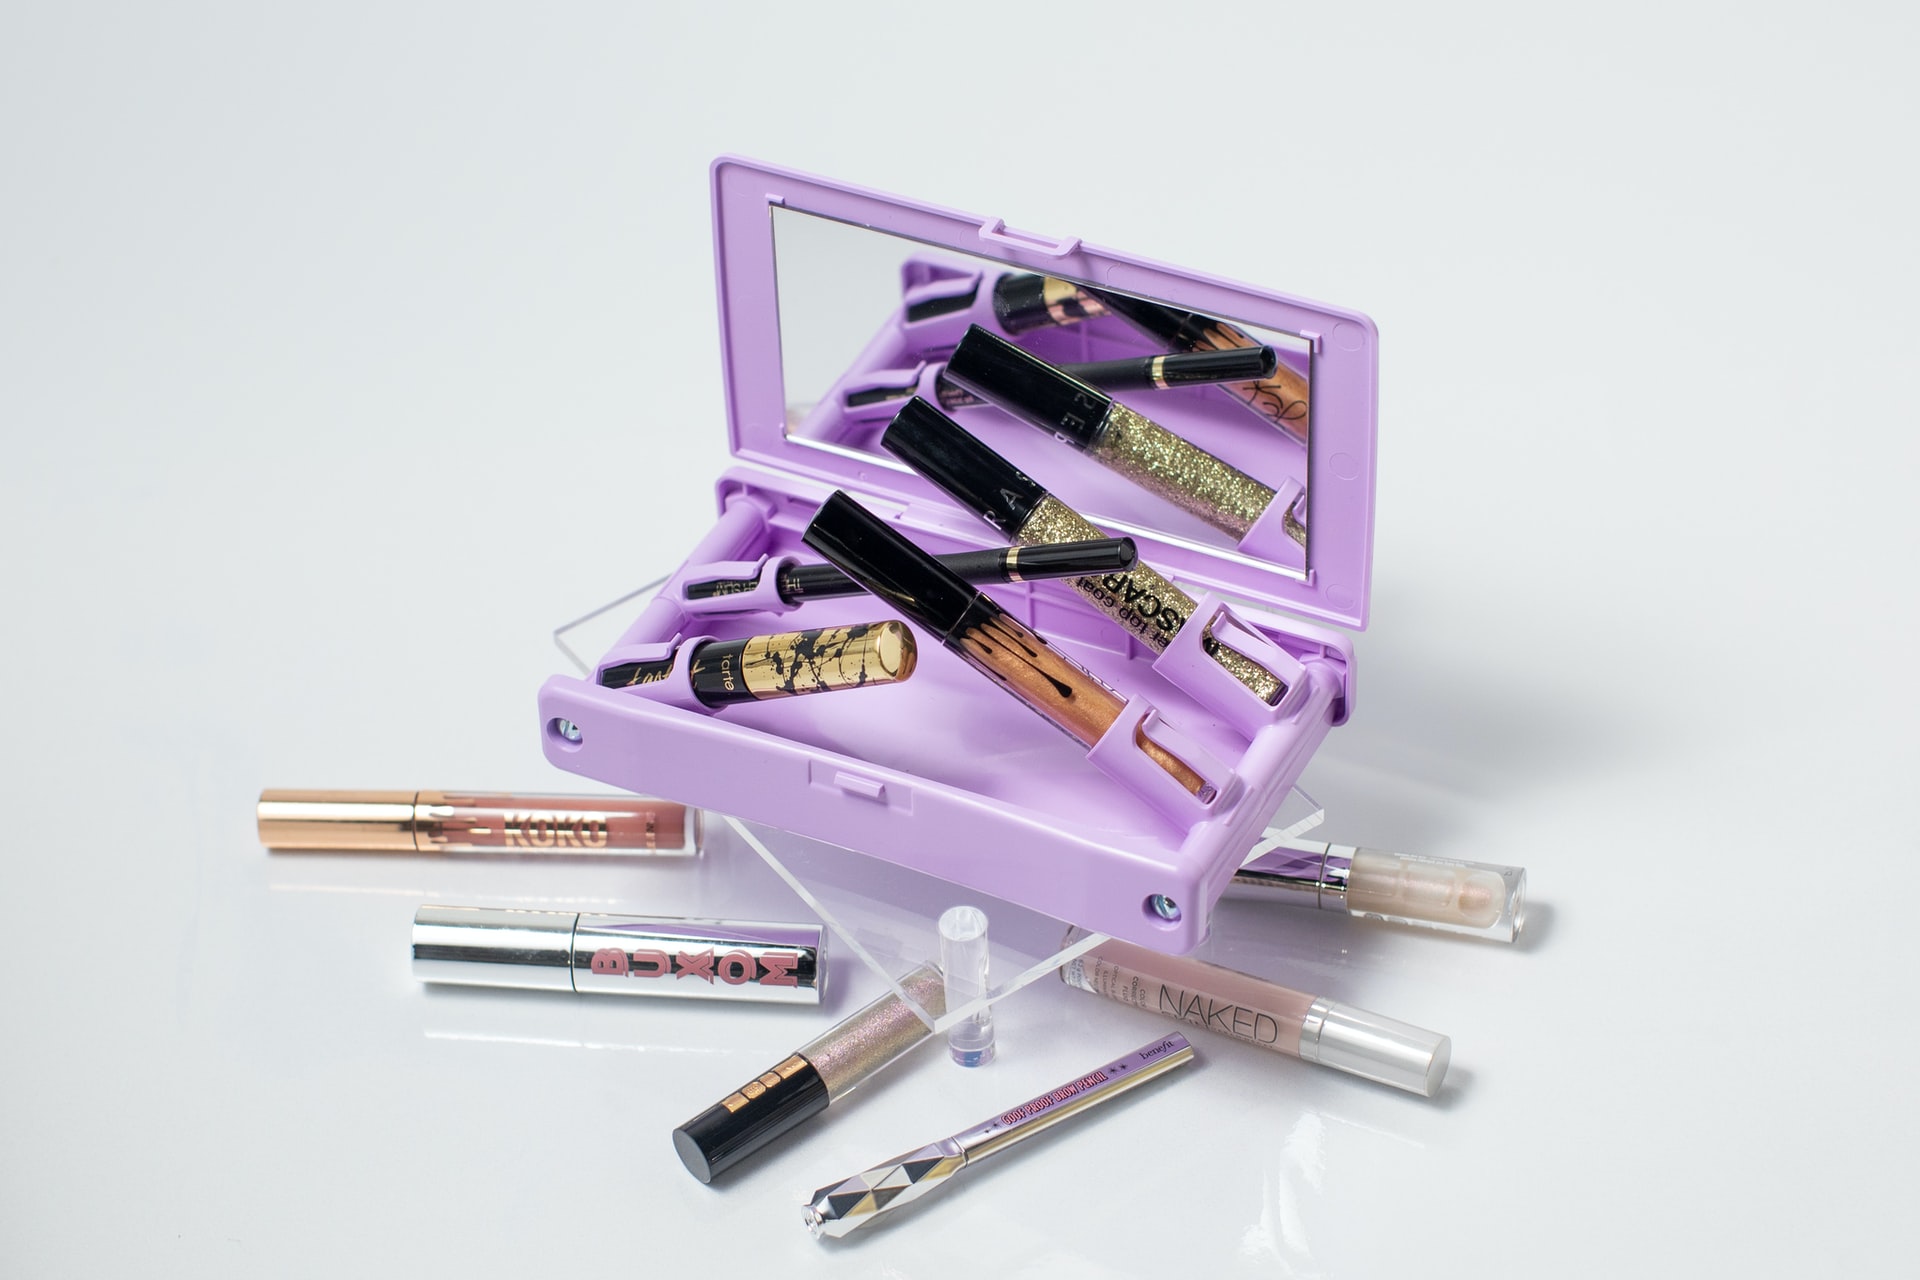 How to edit product photos: example of purple makeup box on white background